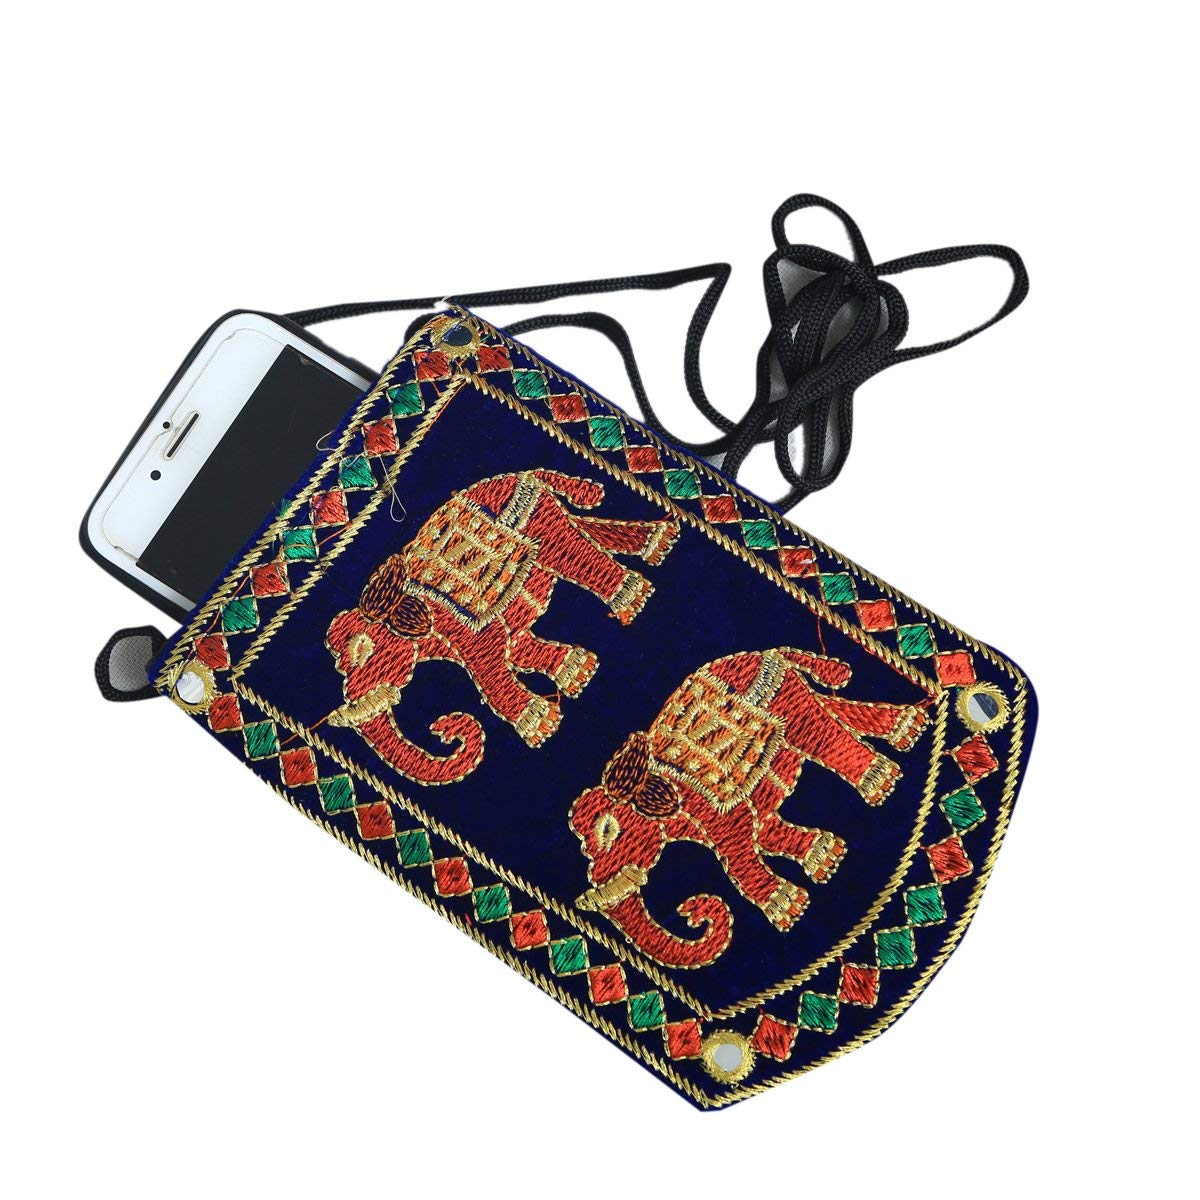 Kuber Industries Designer Embroided Velvet Phone Pouch Cover with Purse Pocket and Sari Hook